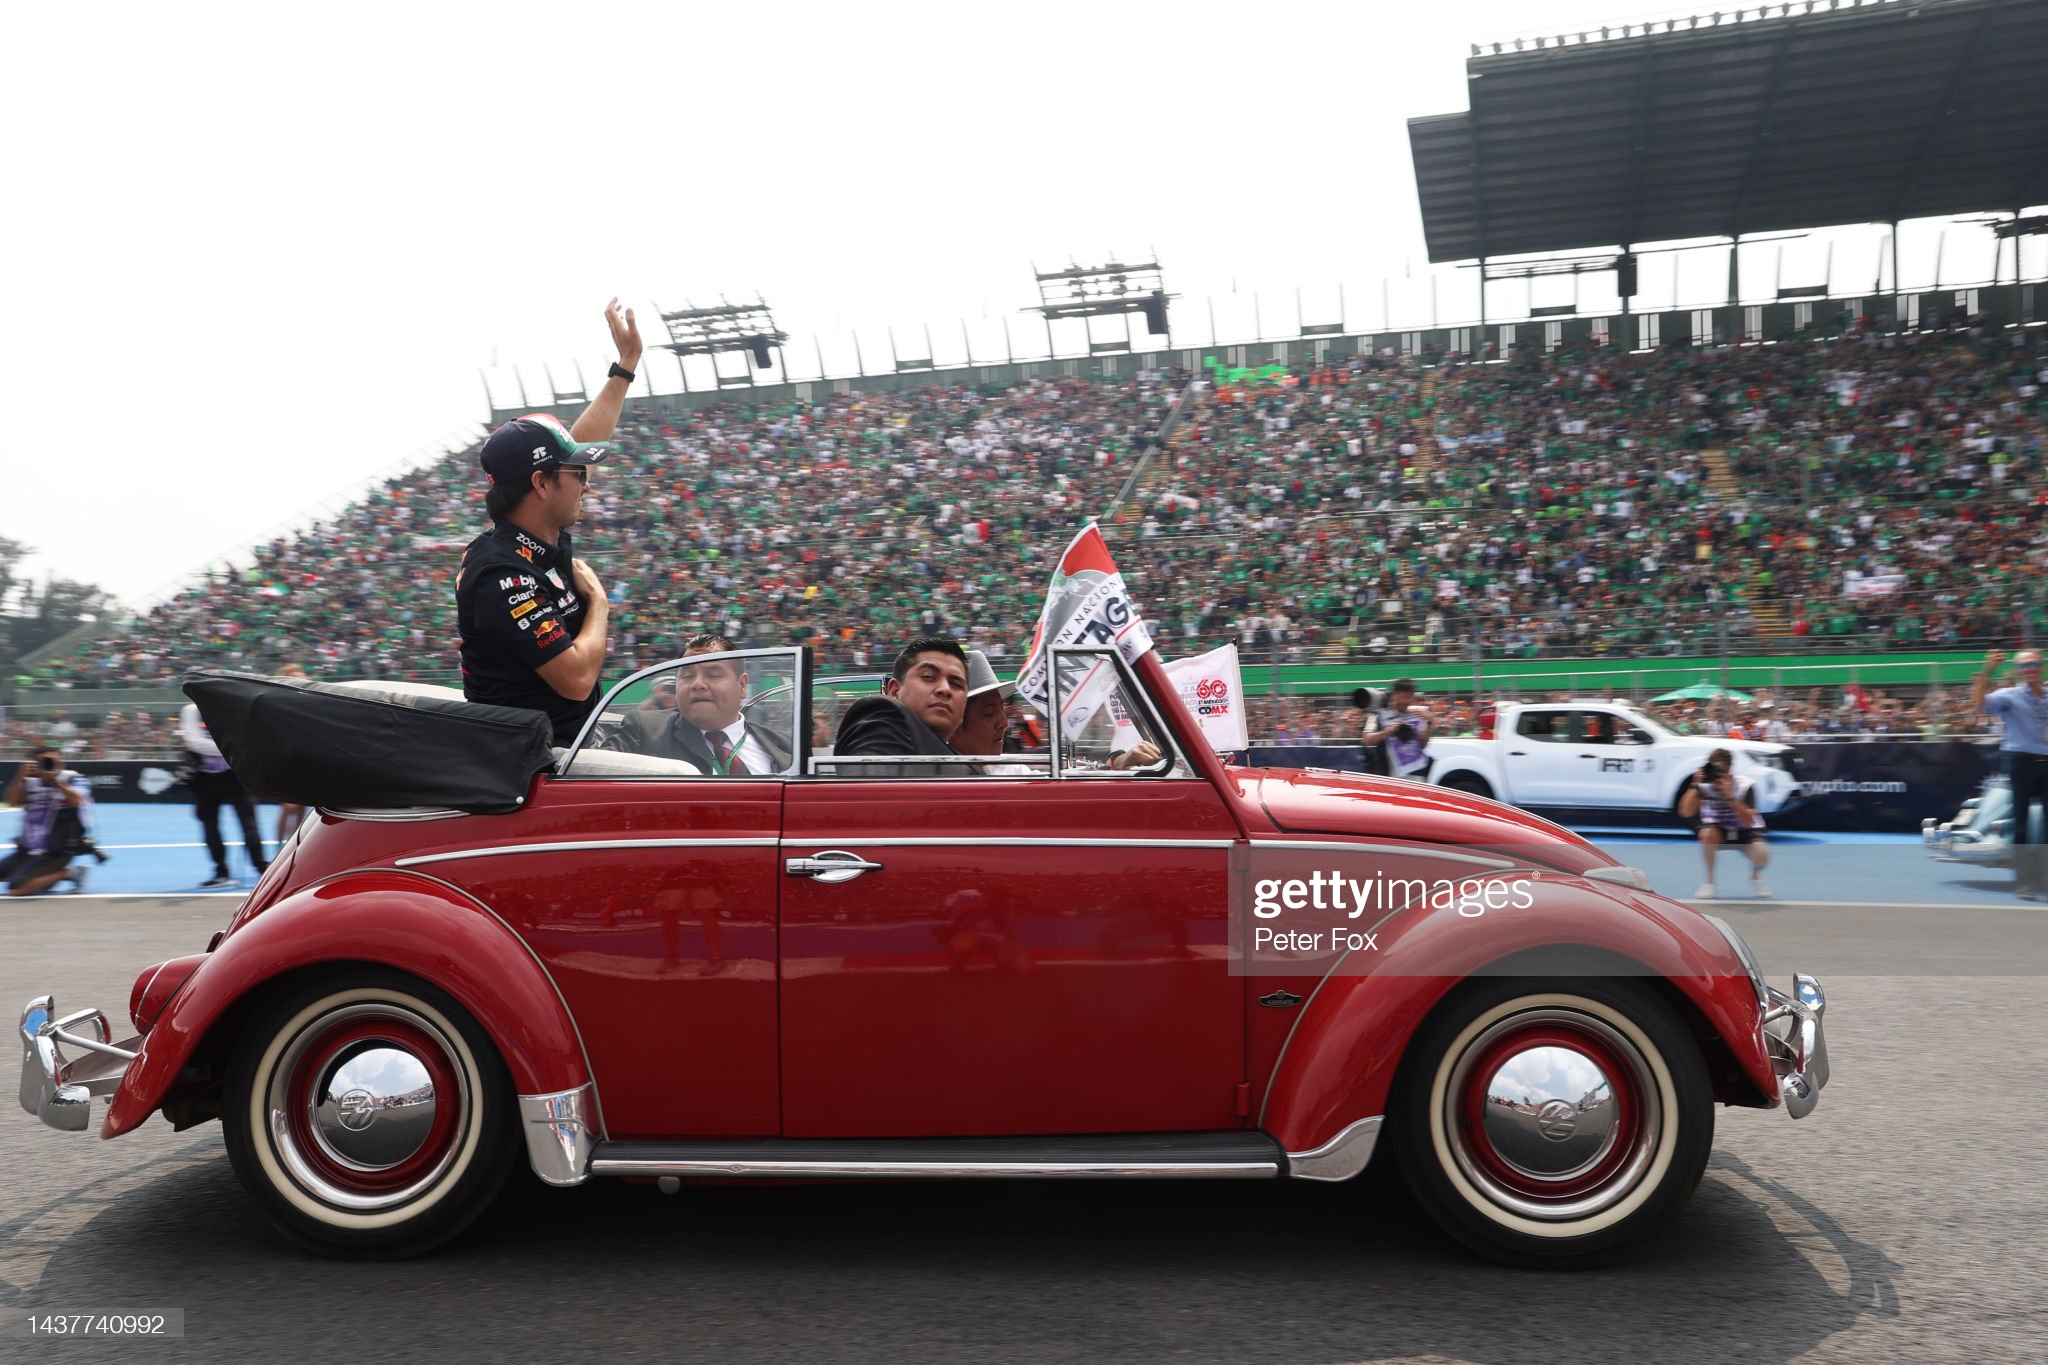 Sergio Perez of Mexico and Red Bull Racing waves to the crowd on the drivers’ parade.